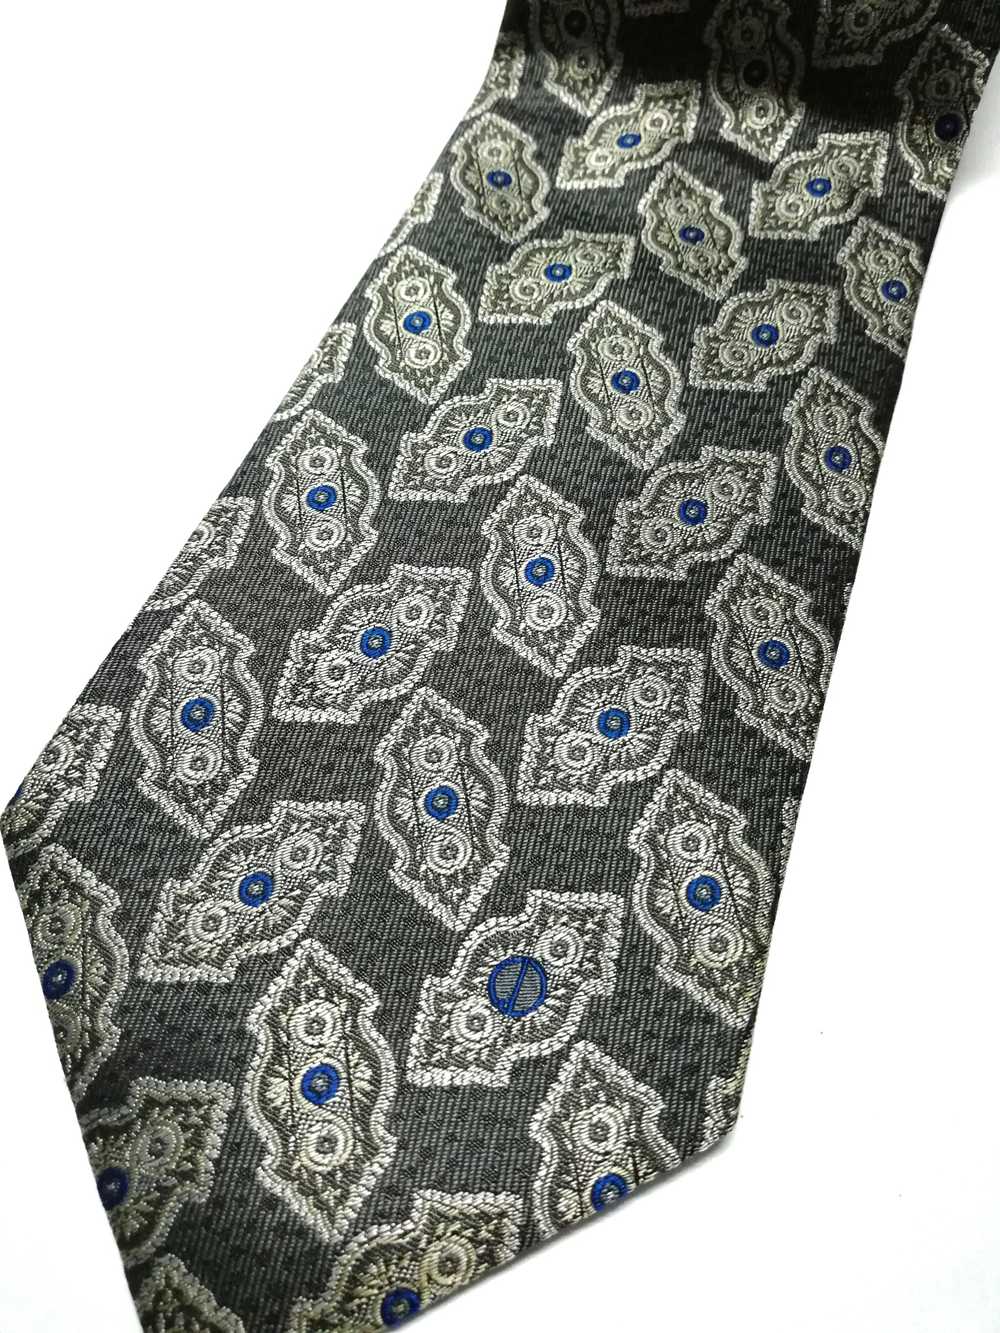 Alfred Dunhill - Vintage Dunhill Necktie Geometri… - image 3